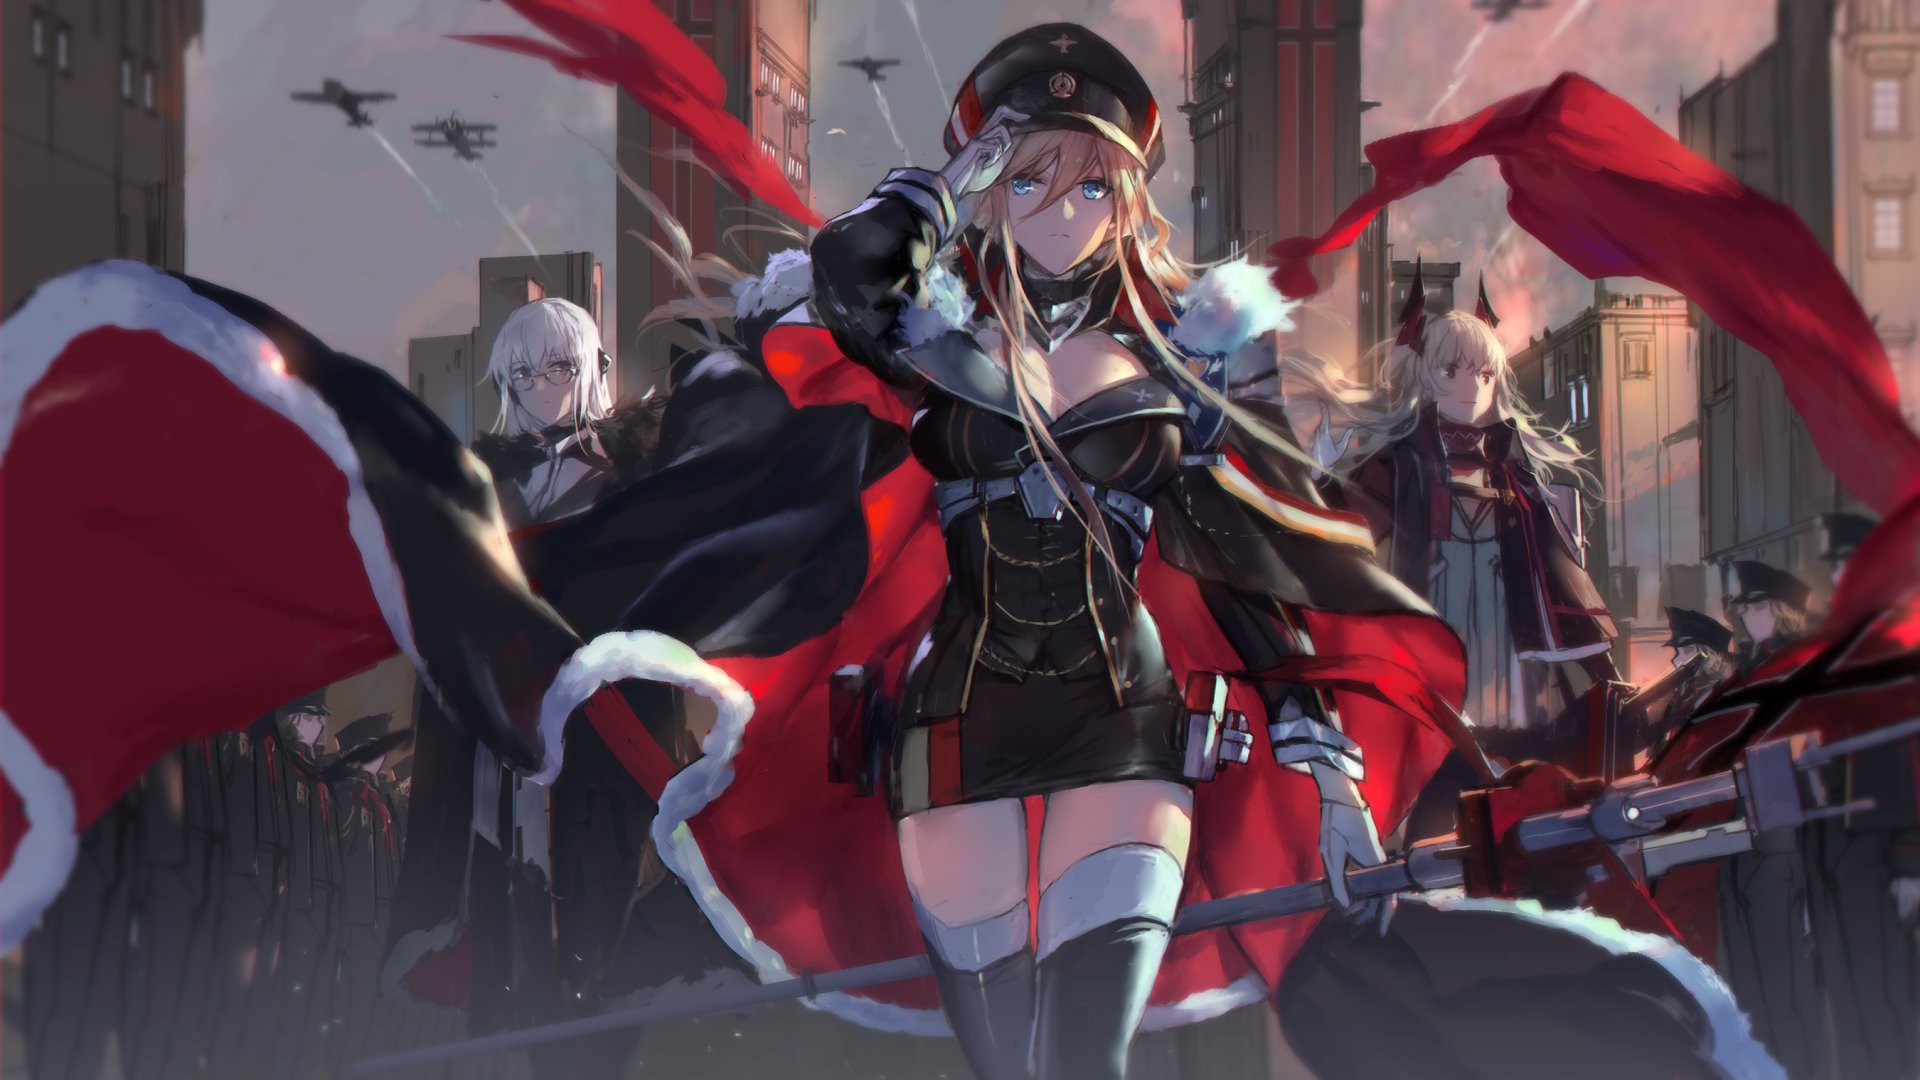 20 Bismarck Azur Lane HD Wallpapers and Backgrounds